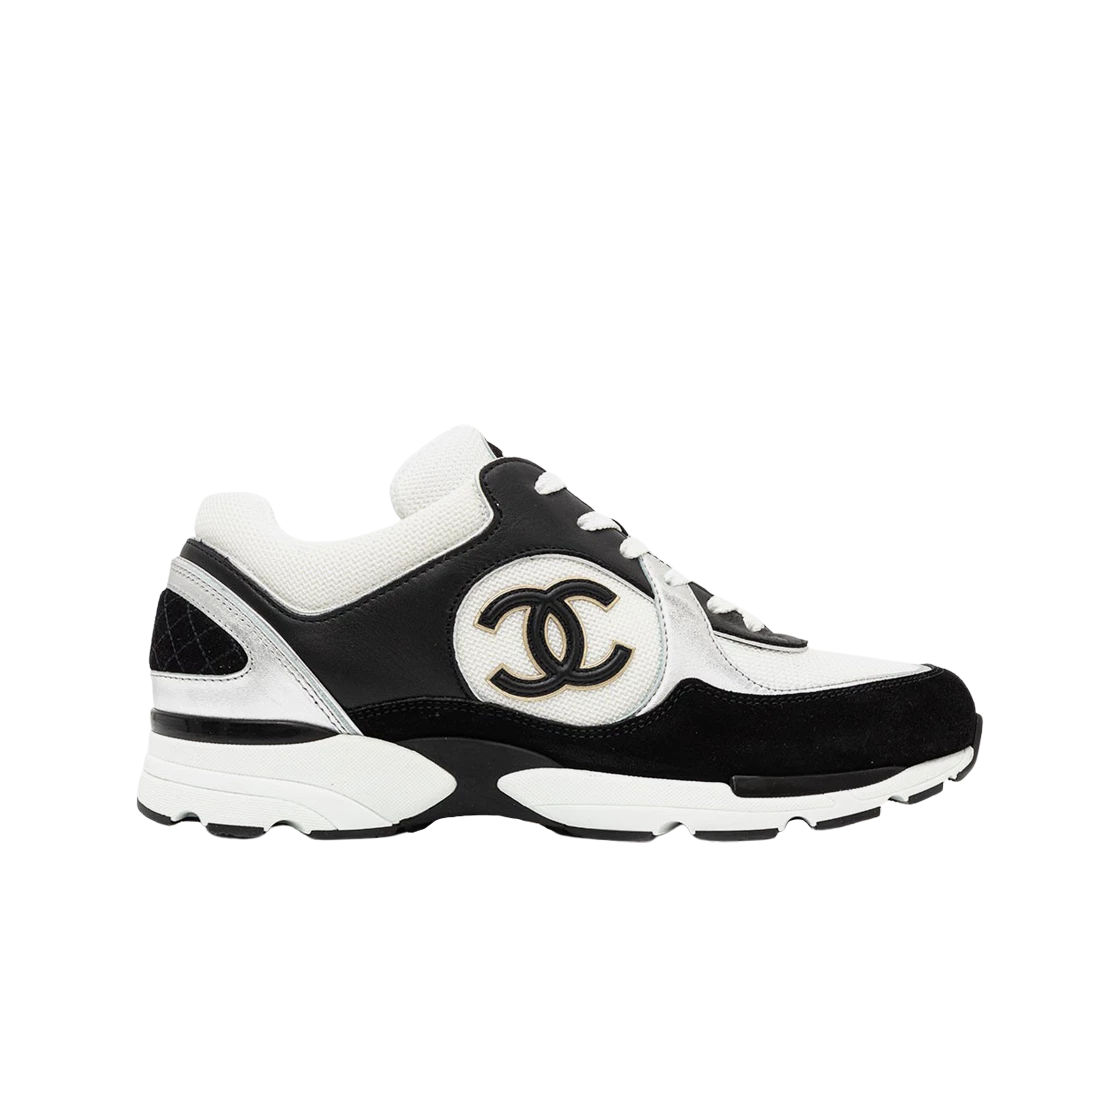 SASOM  shoes Chanel Sneakers Calfskin Fabric & Black White Silver Check  the latest price now!